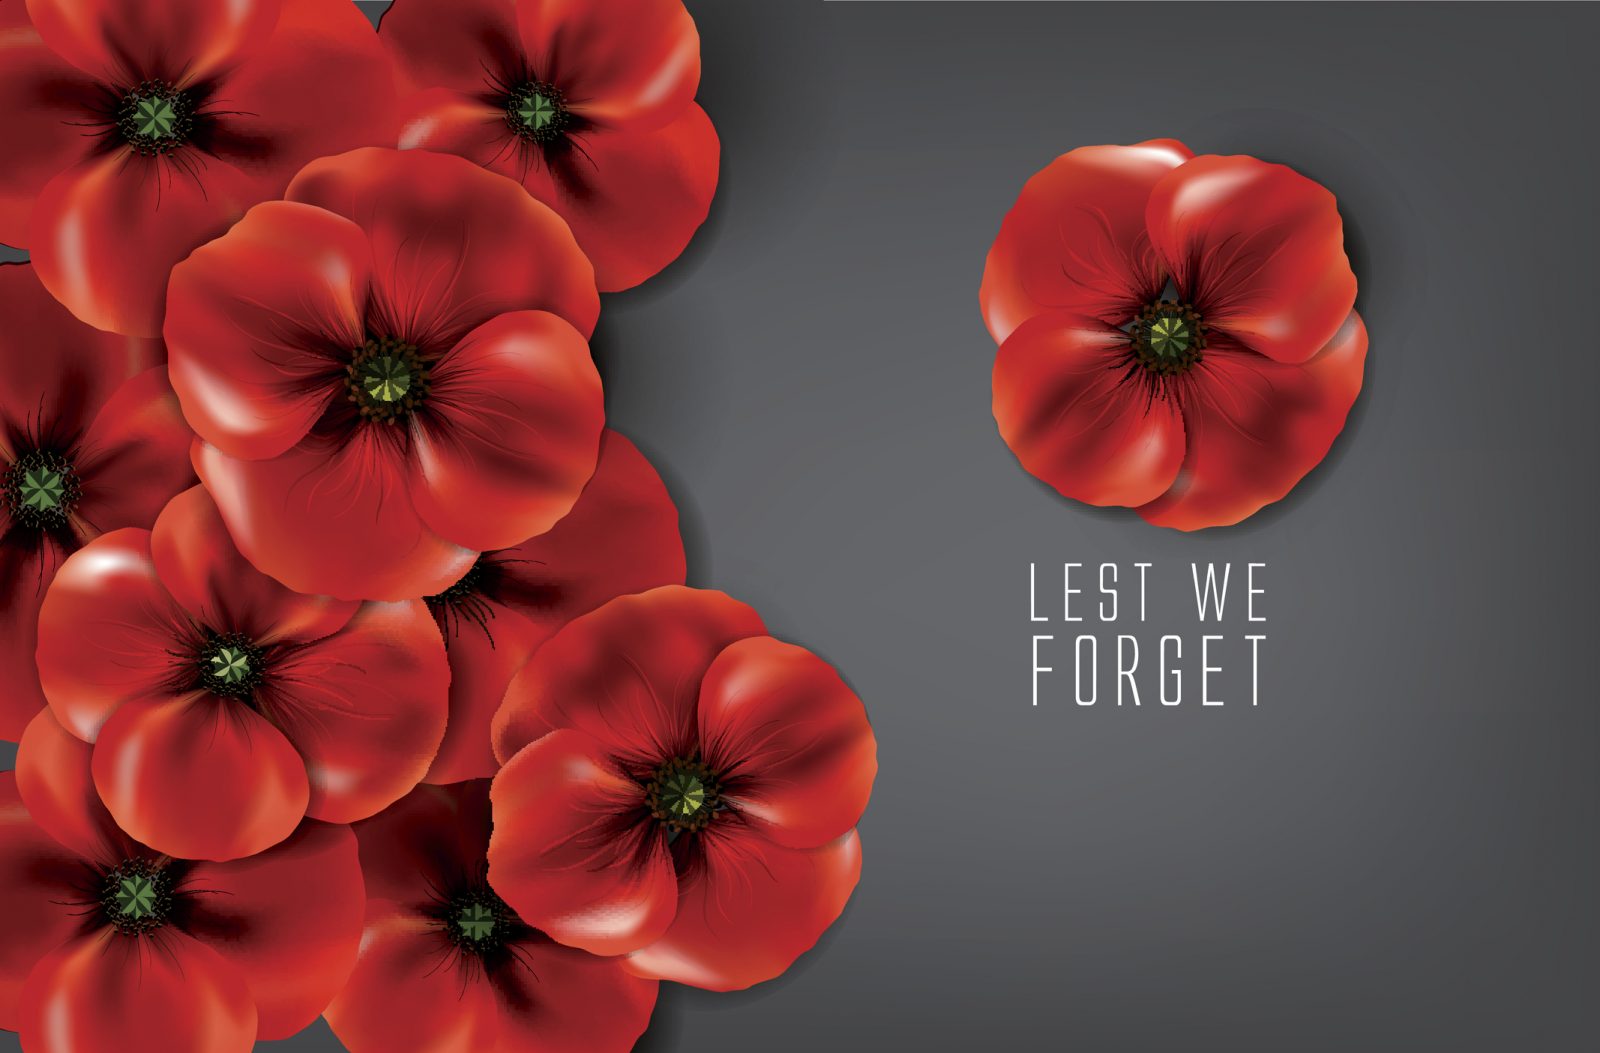 Illustrated red poppies on a grey background with the text "lest we forget" for Remembrance Day on November 11.